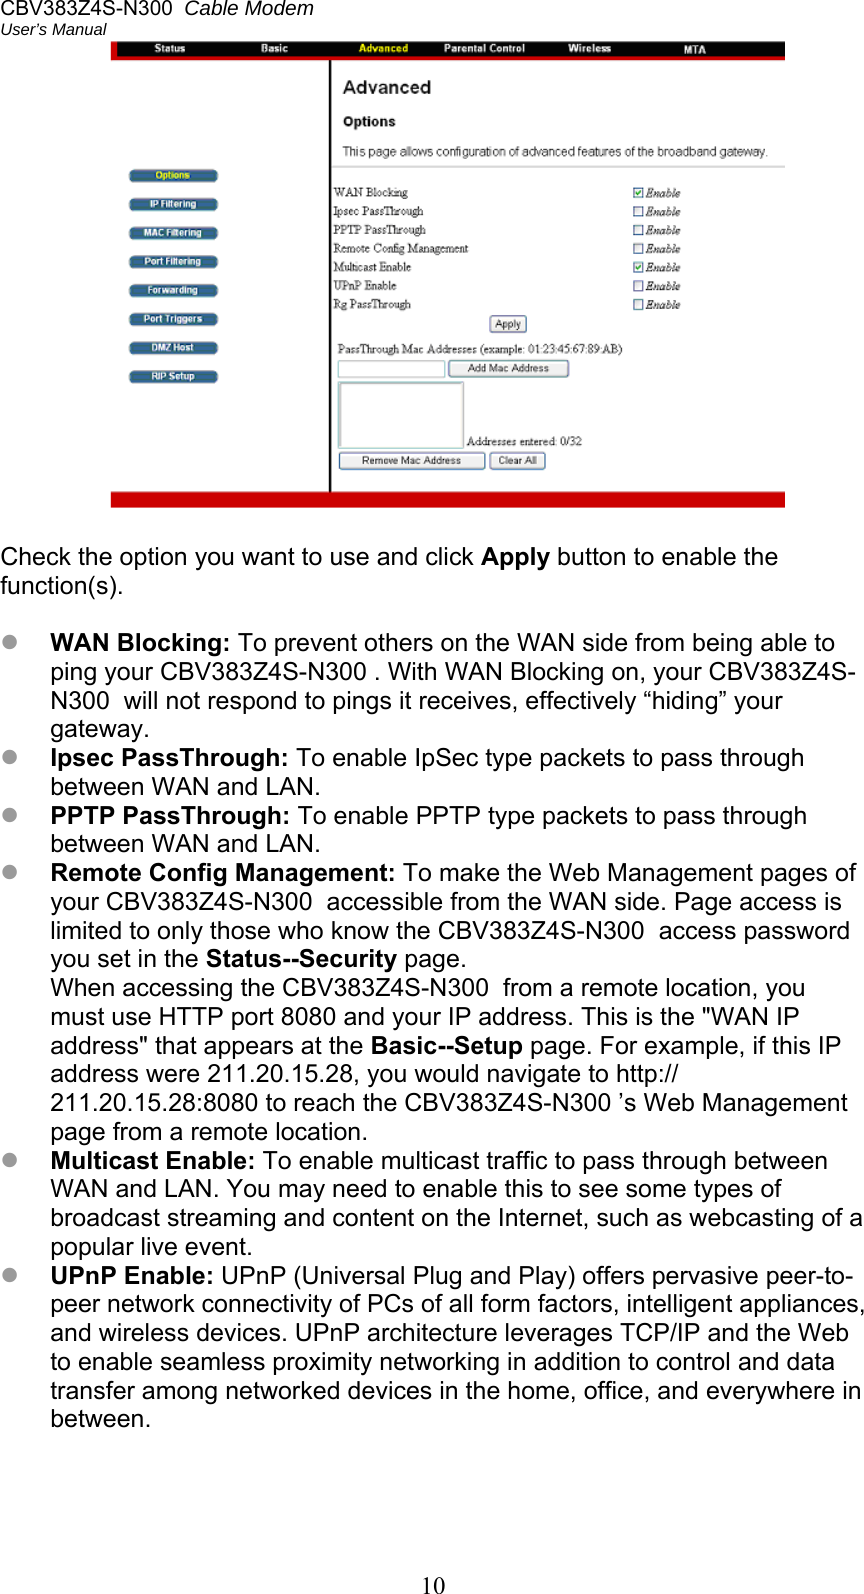 CBV383Z4S-N300  Cable Modem  User’s Manual 10   Check the option you want to use and click Apply button to enable the function(s).   WAN Blocking: To prevent others on the WAN side from being able to ping your CBV383Z4S-N300 . With WAN Blocking on, your CBV383Z4S-N300  will not respond to pings it receives, effectively “hiding” your gateway.  Ipsec PassThrough: To enable IpSec type packets to pass through between WAN and LAN.  PPTP PassThrough: To enable PPTP type packets to pass through between WAN and LAN.  Remote Config Management: To make the Web Management pages of your CBV383Z4S-N300  accessible from the WAN side. Page access is limited to only those who know the CBV383Z4S-N300  access password you set in the Status--Security page. When accessing the CBV383Z4S-N300  from a remote location, you must use HTTP port 8080 and your IP address. This is the &quot;WAN IP address&quot; that appears at the Basic--Setup page. For example, if this IP address were 211.20.15.28, you would navigate to http:// 211.20.15.28:8080 to reach the CBV383Z4S-N300 ’s Web Management page from a remote location.  Multicast Enable: To enable multicast traffic to pass through between WAN and LAN. You may need to enable this to see some types of broadcast streaming and content on the Internet, such as webcasting of a popular live event.  UPnP Enable: UPnP (Universal Plug and Play) offers pervasive peer-to-peer network connectivity of PCs of all form factors, intelligent appliances, and wireless devices. UPnP architecture leverages TCP/IP and the Web to enable seamless proximity networking in addition to control and data transfer among networked devices in the home, office, and everywhere in between.  